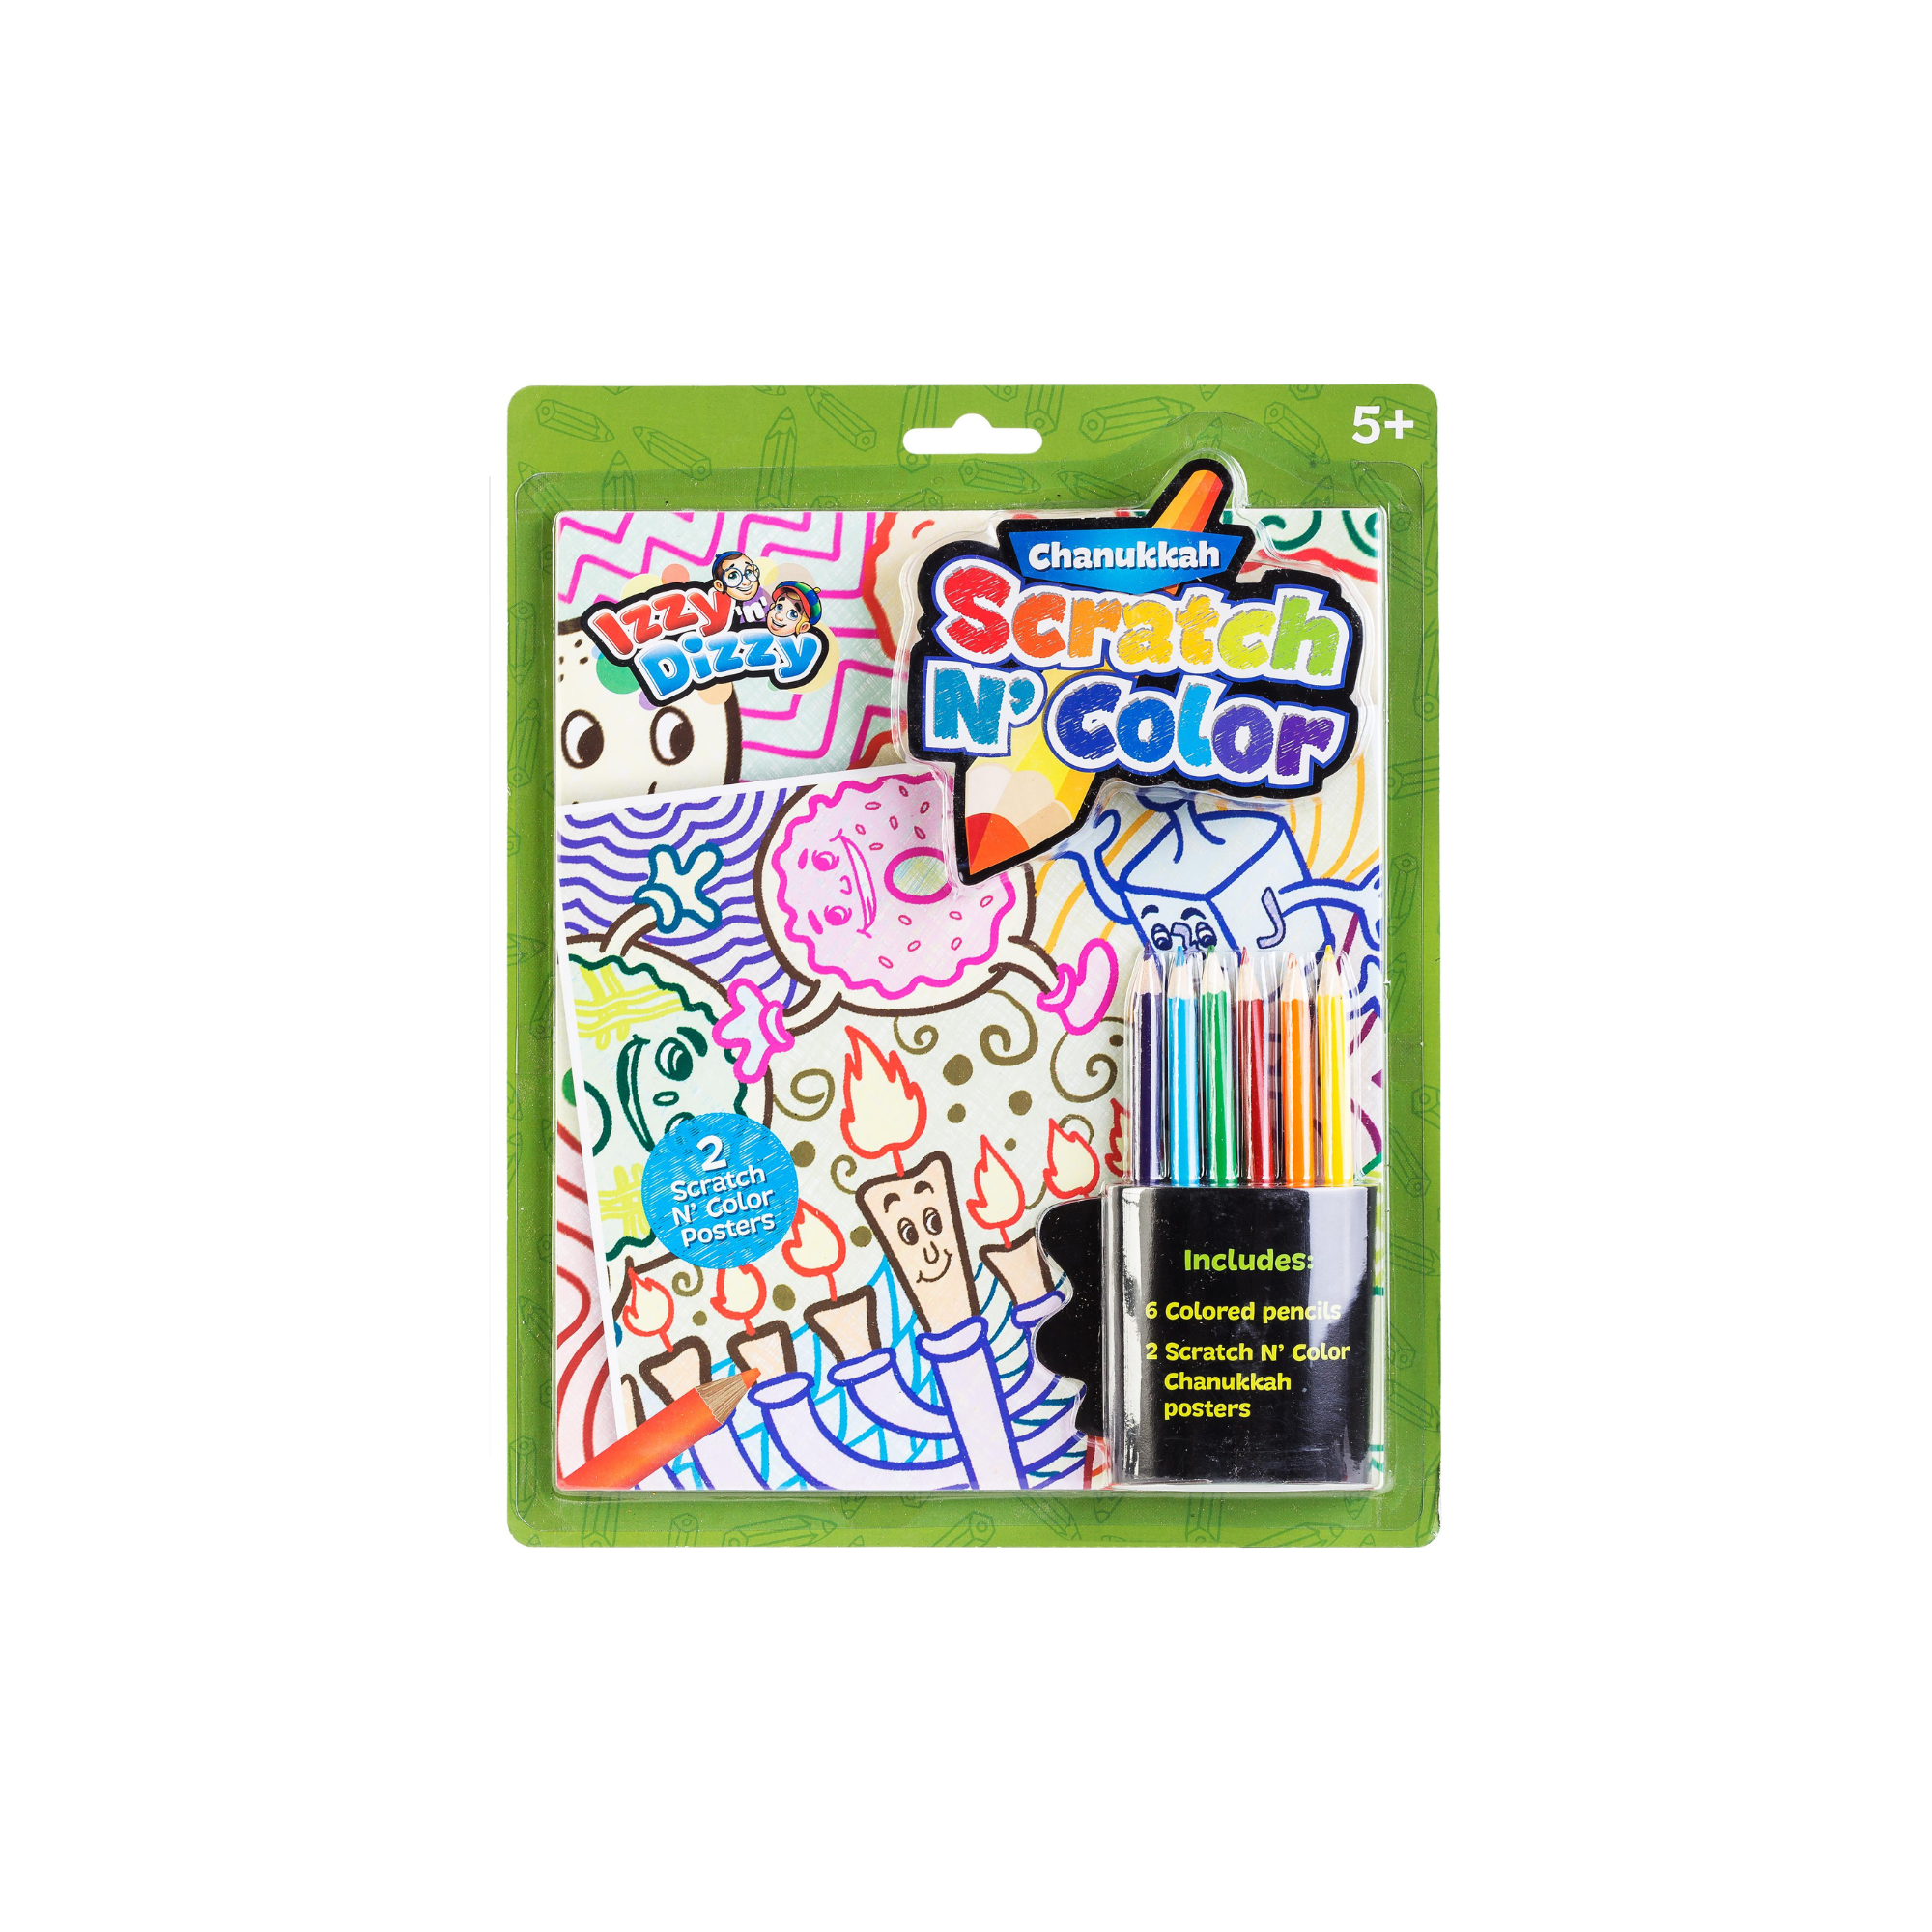 Chanukah Scratch And Color Kit